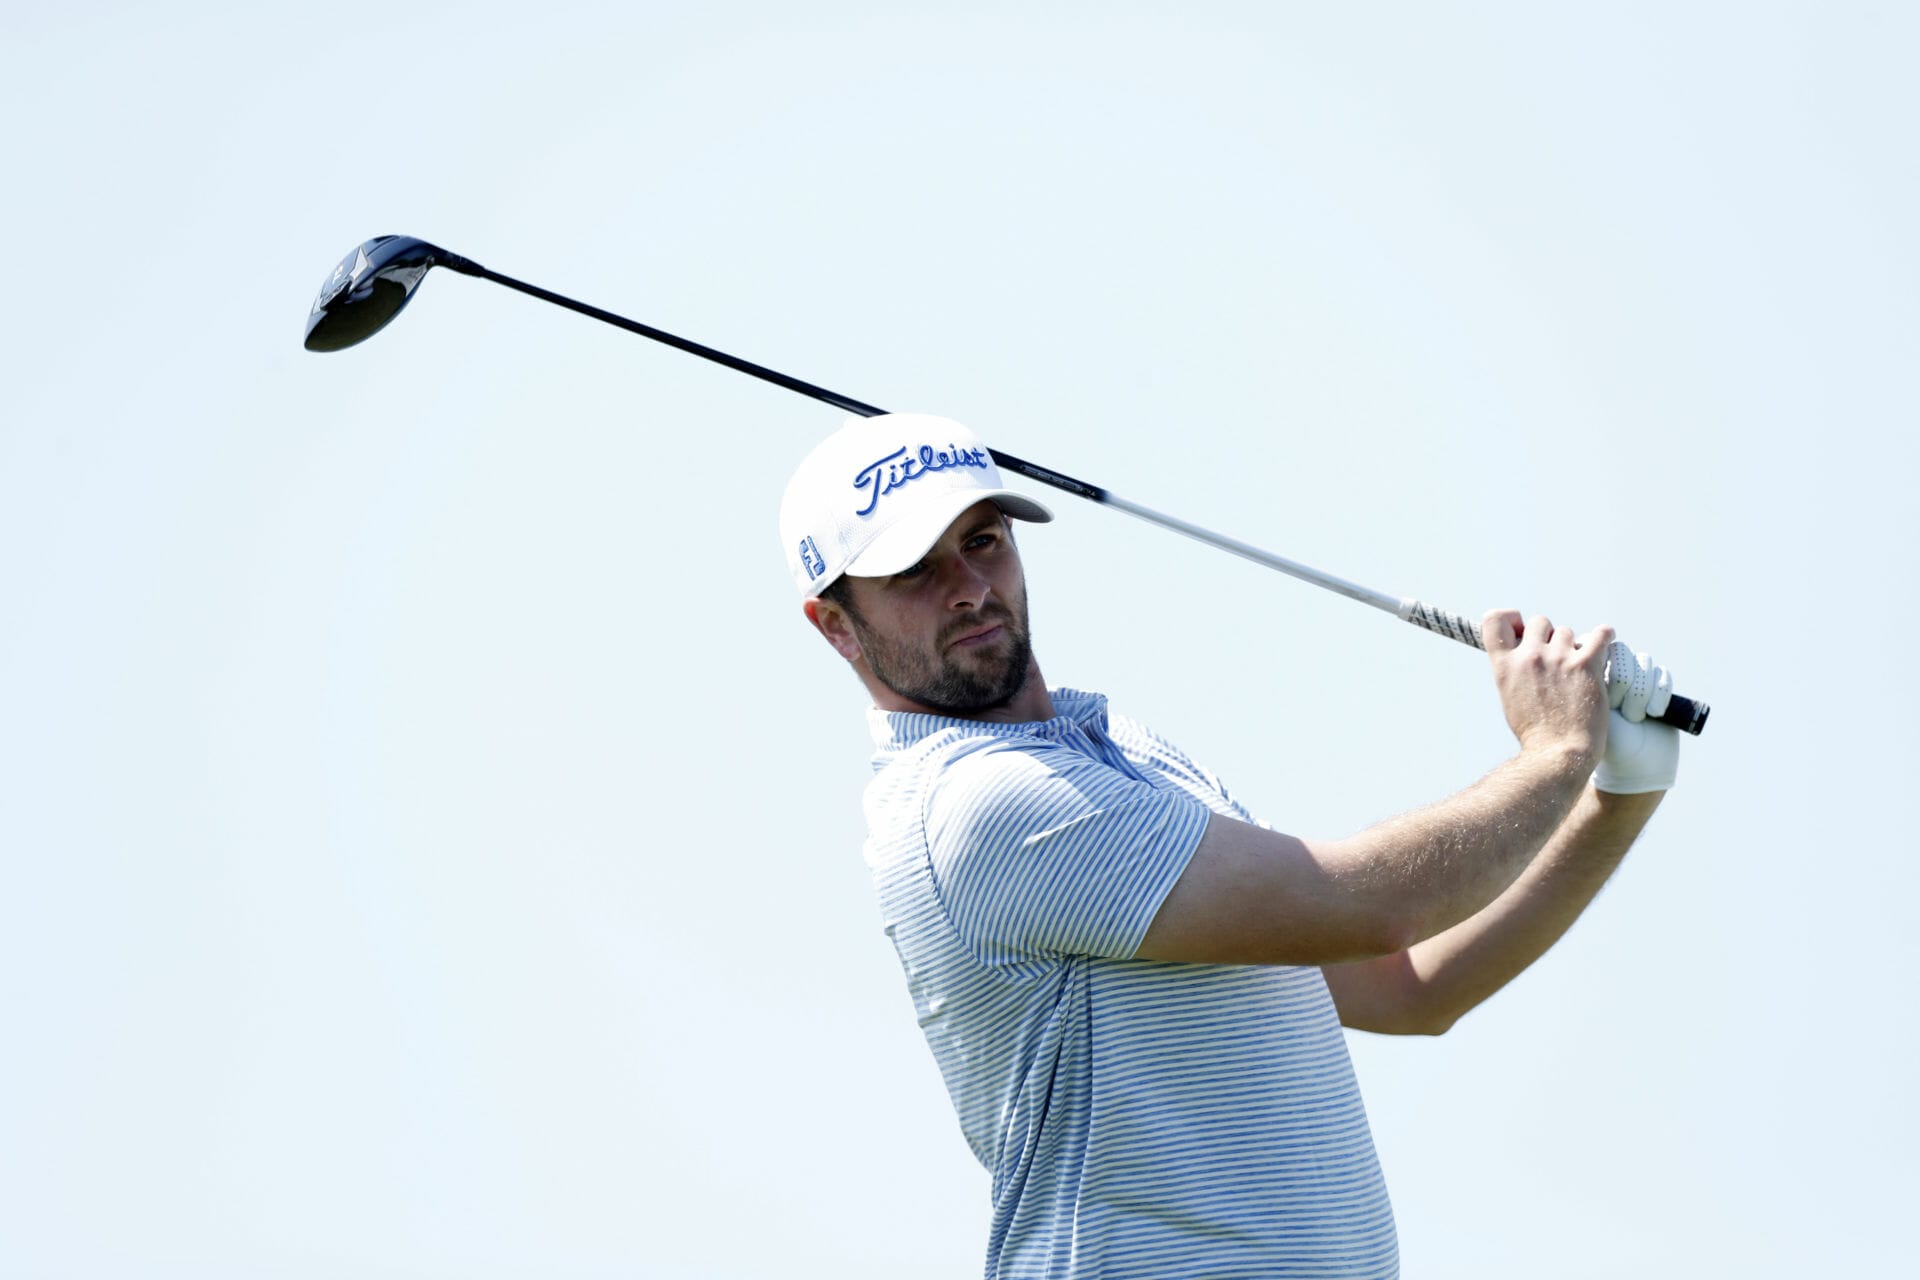 McGee & Sharvin move right into contention in Calais